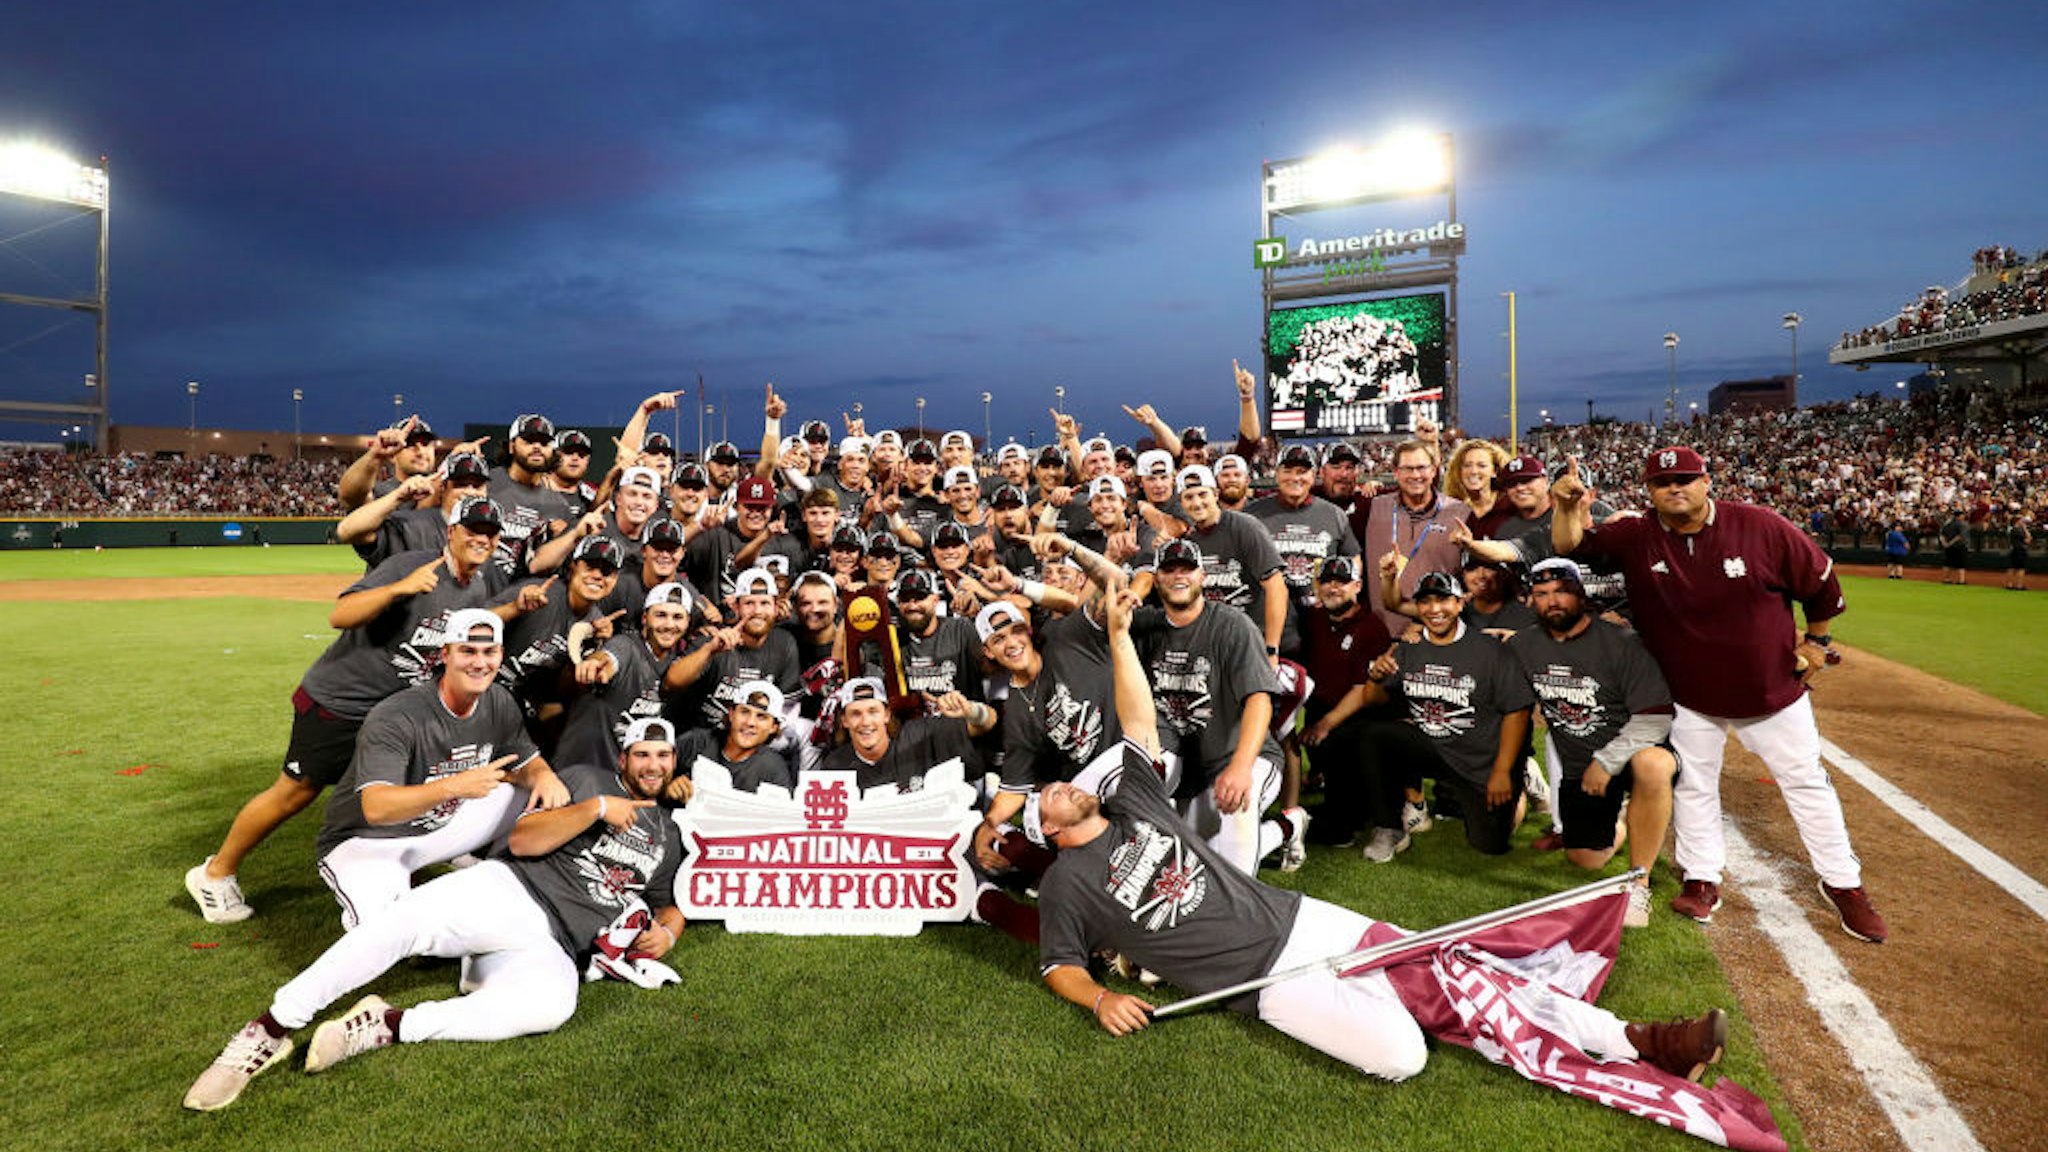 OMAHA, NE - JUNE 30: The Mississippi State Bulldogs celebrate after defeating the Vanderbilt Commodores during the Division I Men's Baseball Championship held at TD Ameritrade Park Omaha on June 30, 2021 in Omaha, Nebraska. (Photo by Jamie Schwaberow/NCAA Photos via Getty Images)